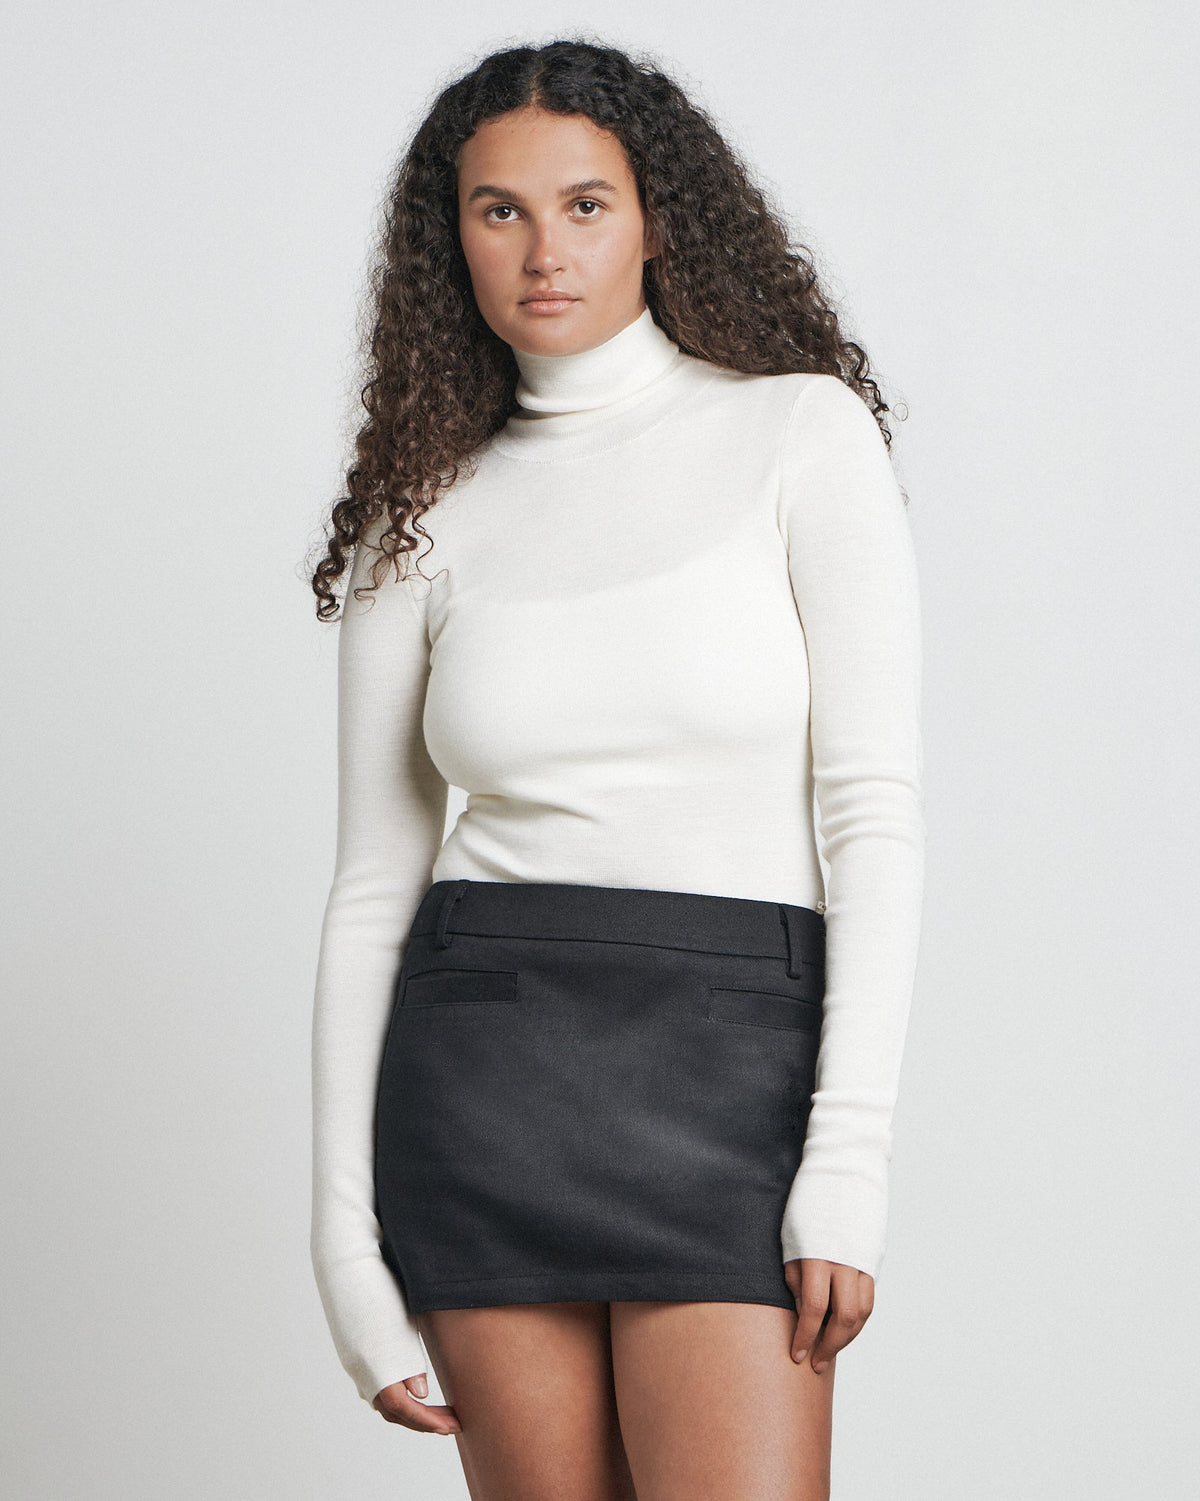 The Long Sleeve Knit Top